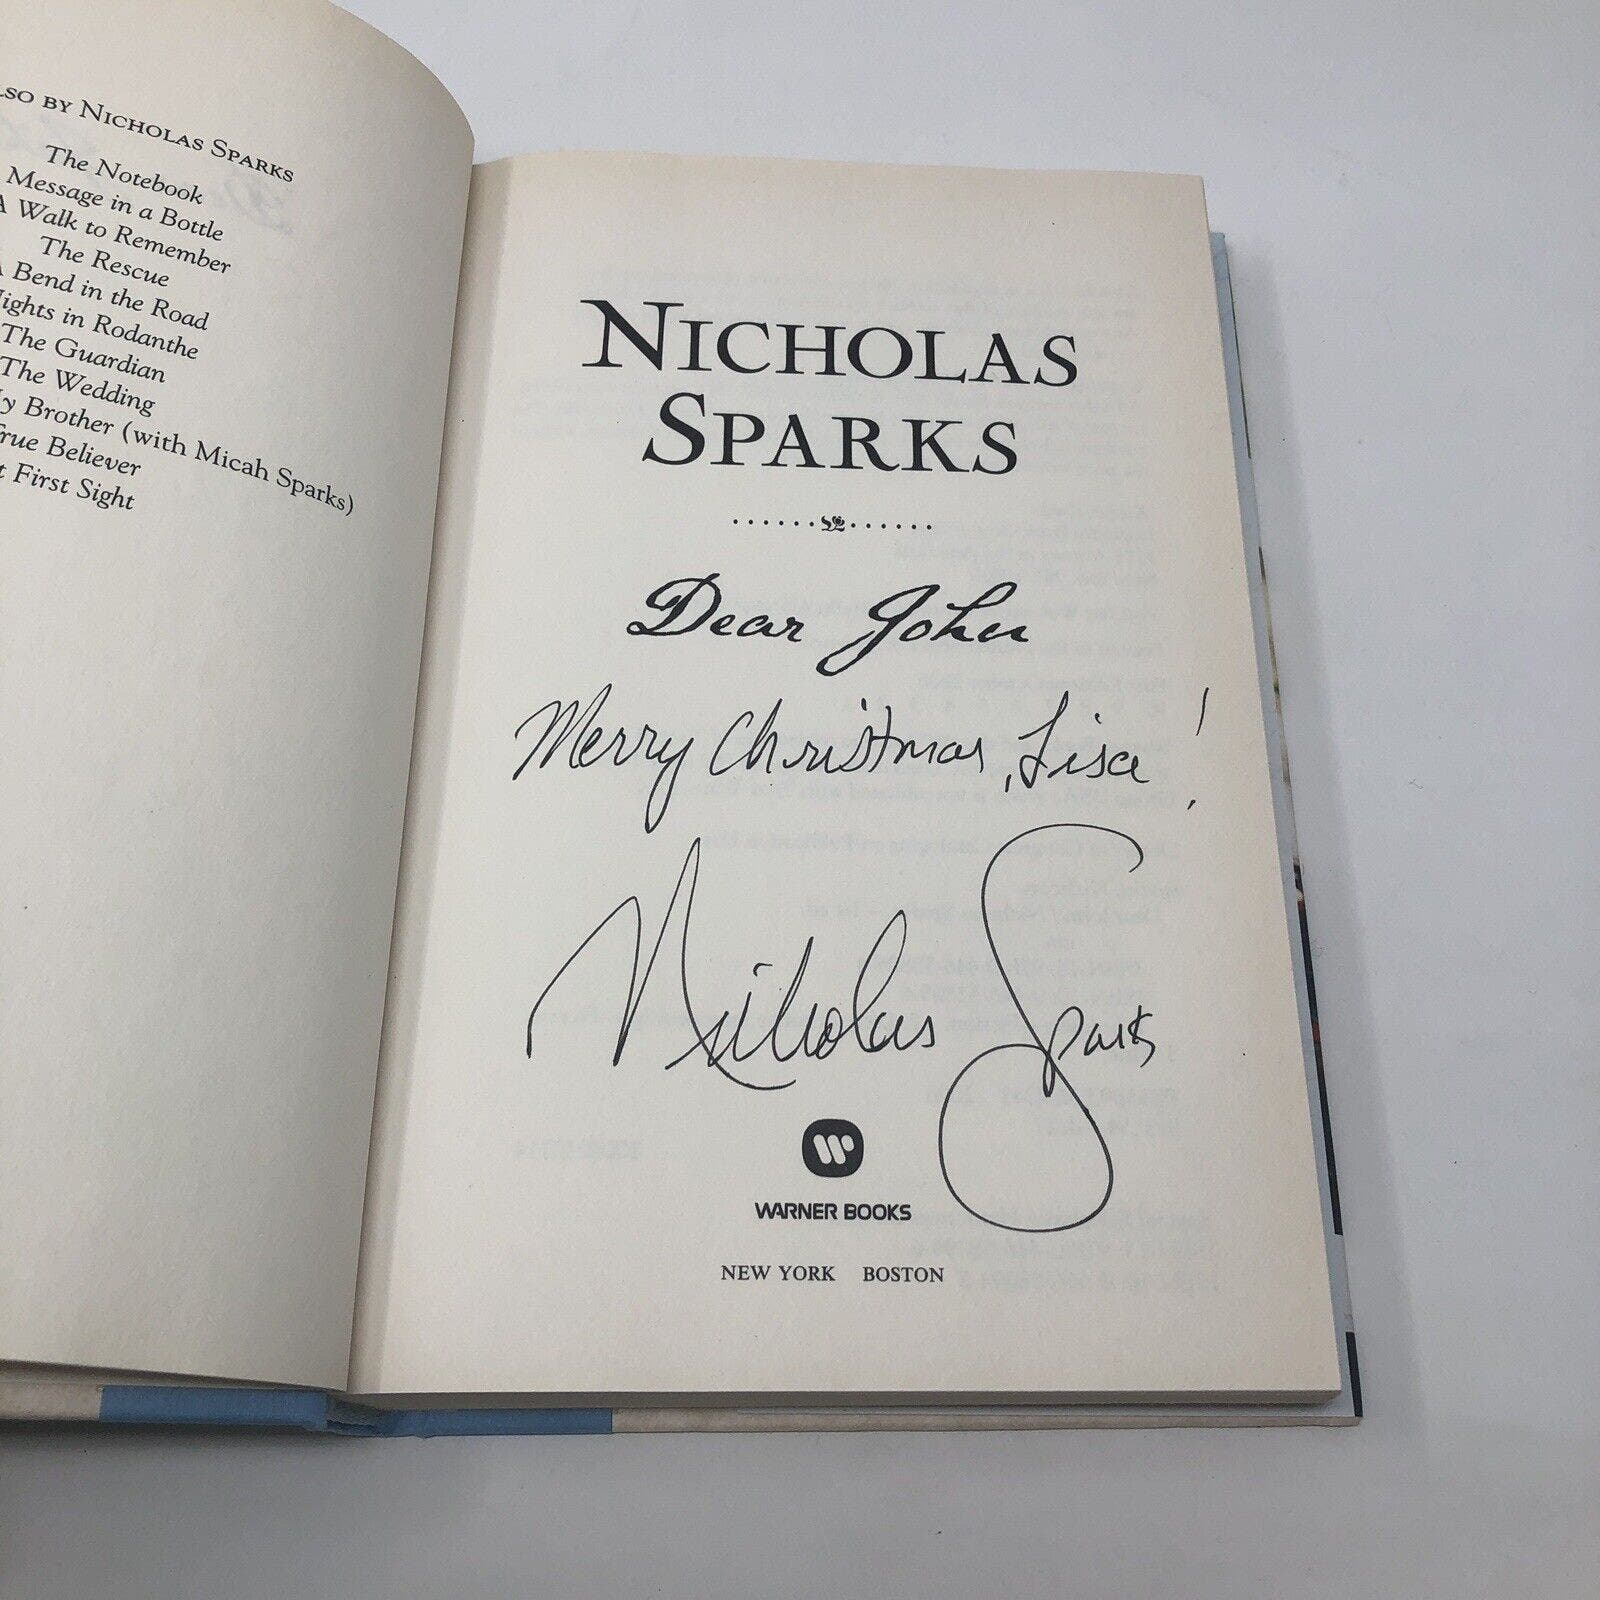 (Signed) Dear John by Nicholas Sparks ~ First Edition - Uncle Buddy's Beard & Used Books